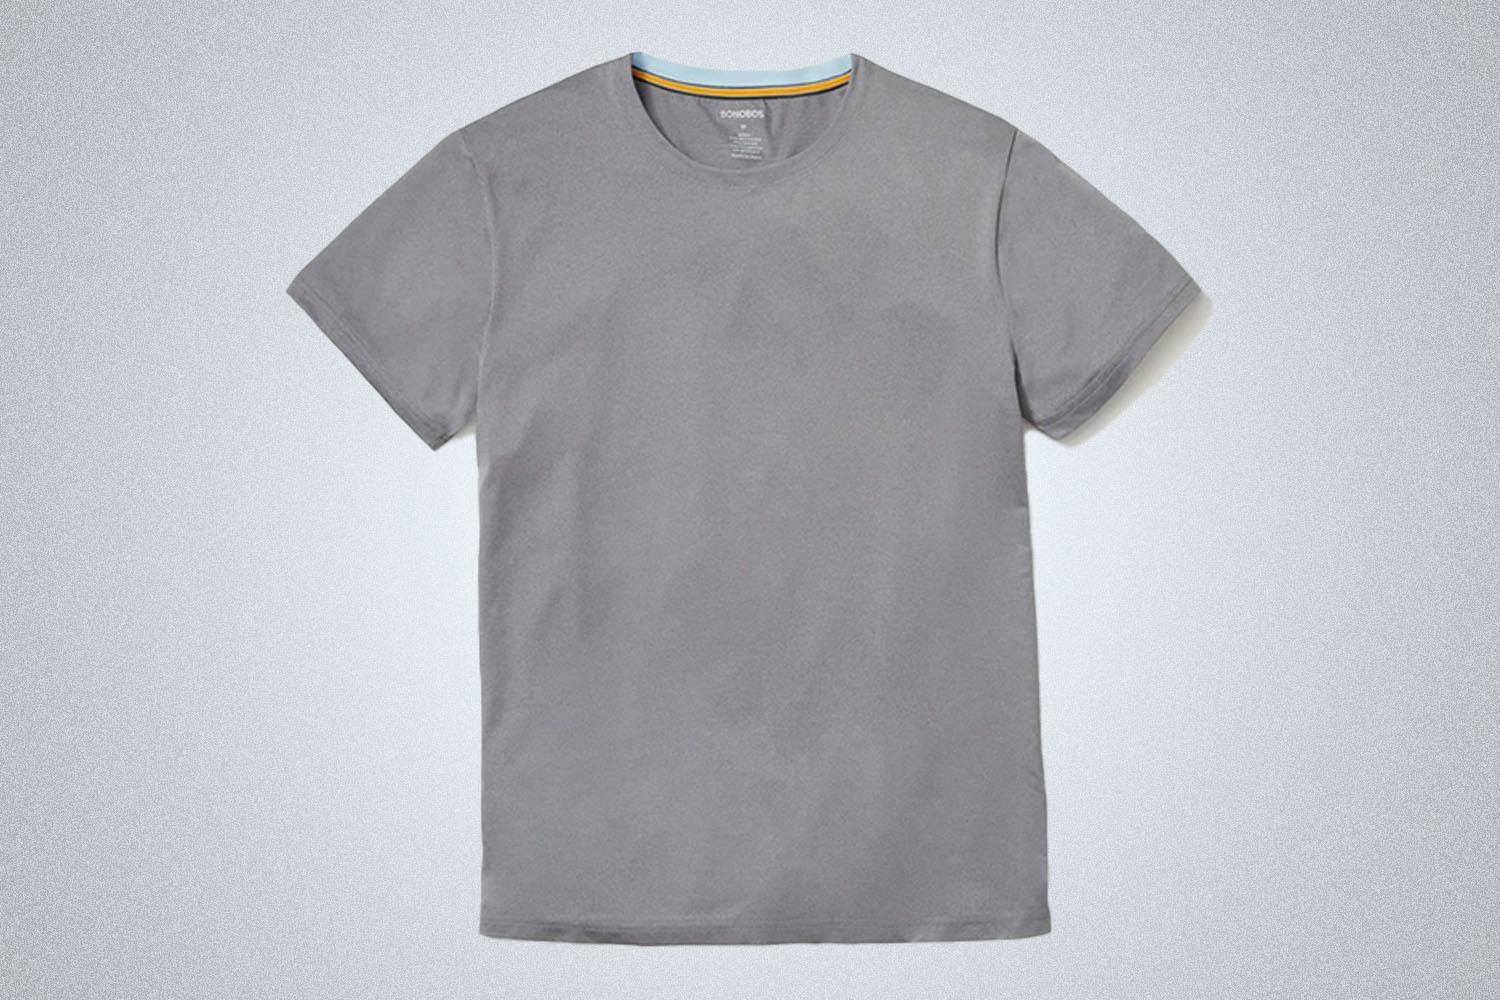 a grey gym tee from Bonobos on a grey background